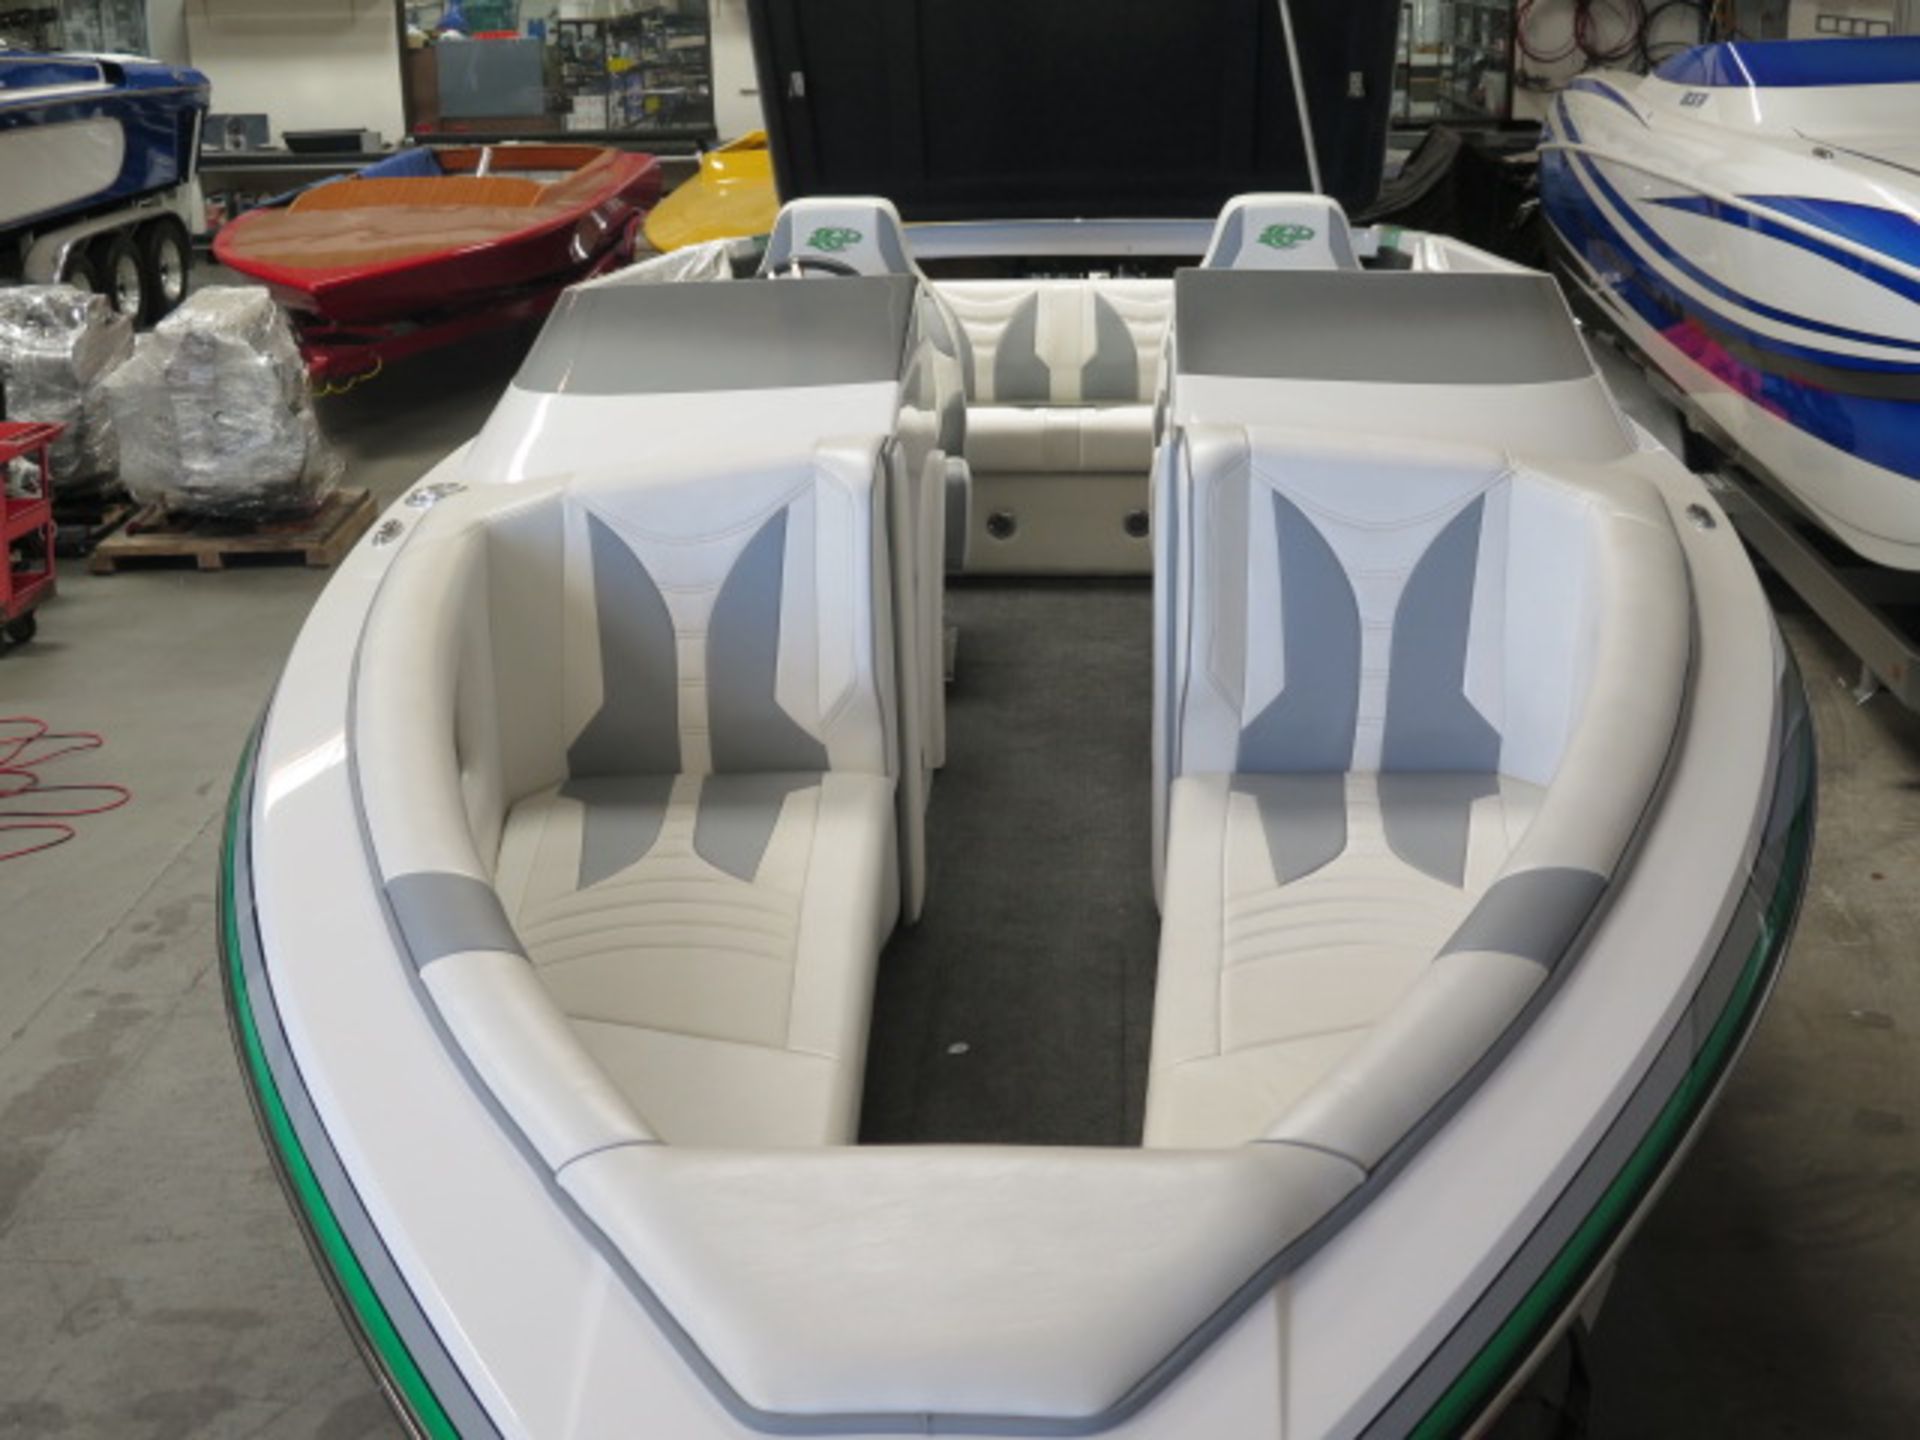 2020 Laveycraft 24' V-Bottom Open Bow Boat w/ Custon Martinez Interior, Boostpower 675Hp, SOLD AS IS - Image 10 of 40